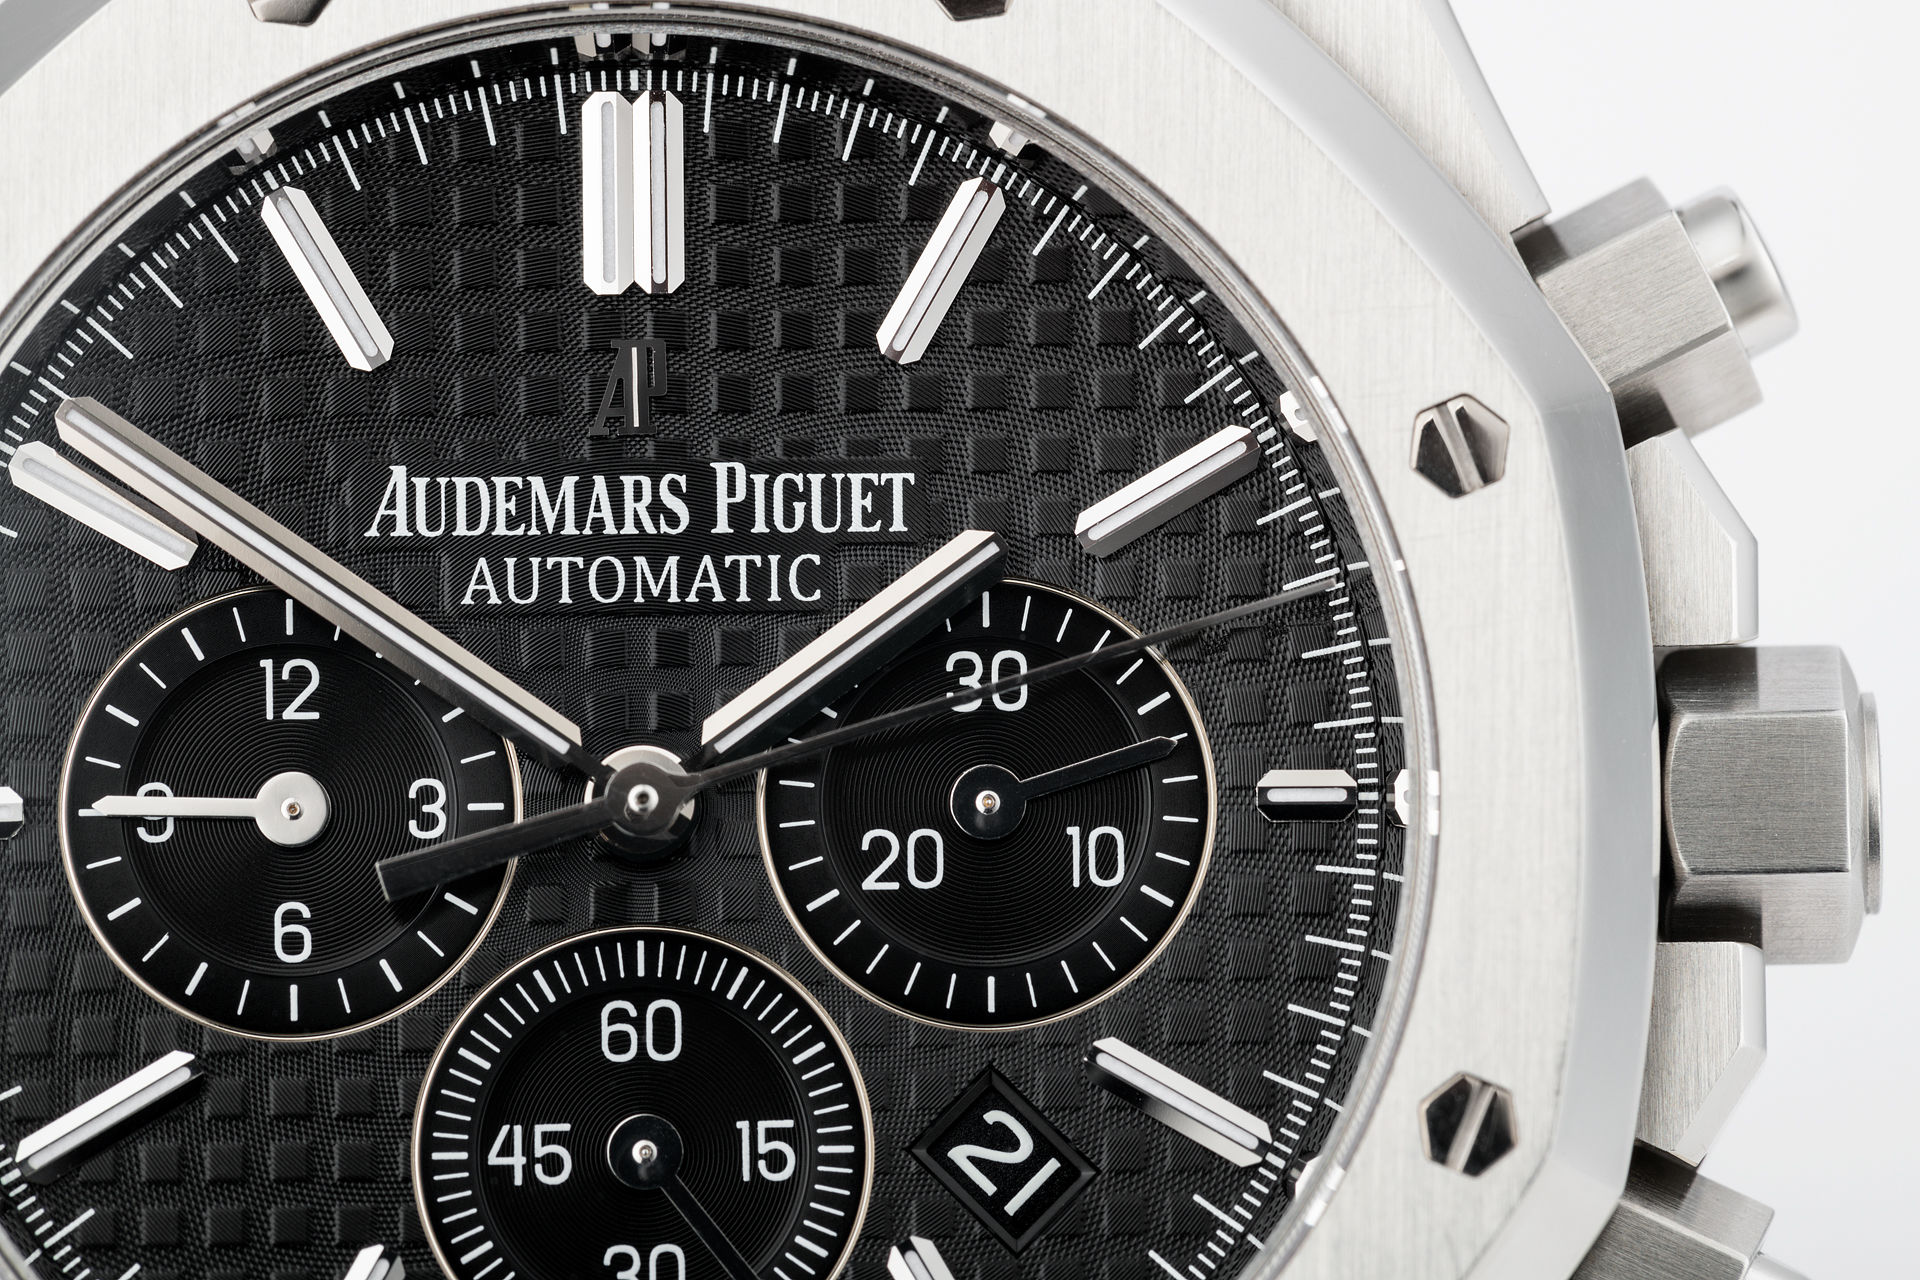 ref 26320ST.OO.1220ST.01 | Box and Papers 'Never Polished' | Audemars Piguet Royal Oak